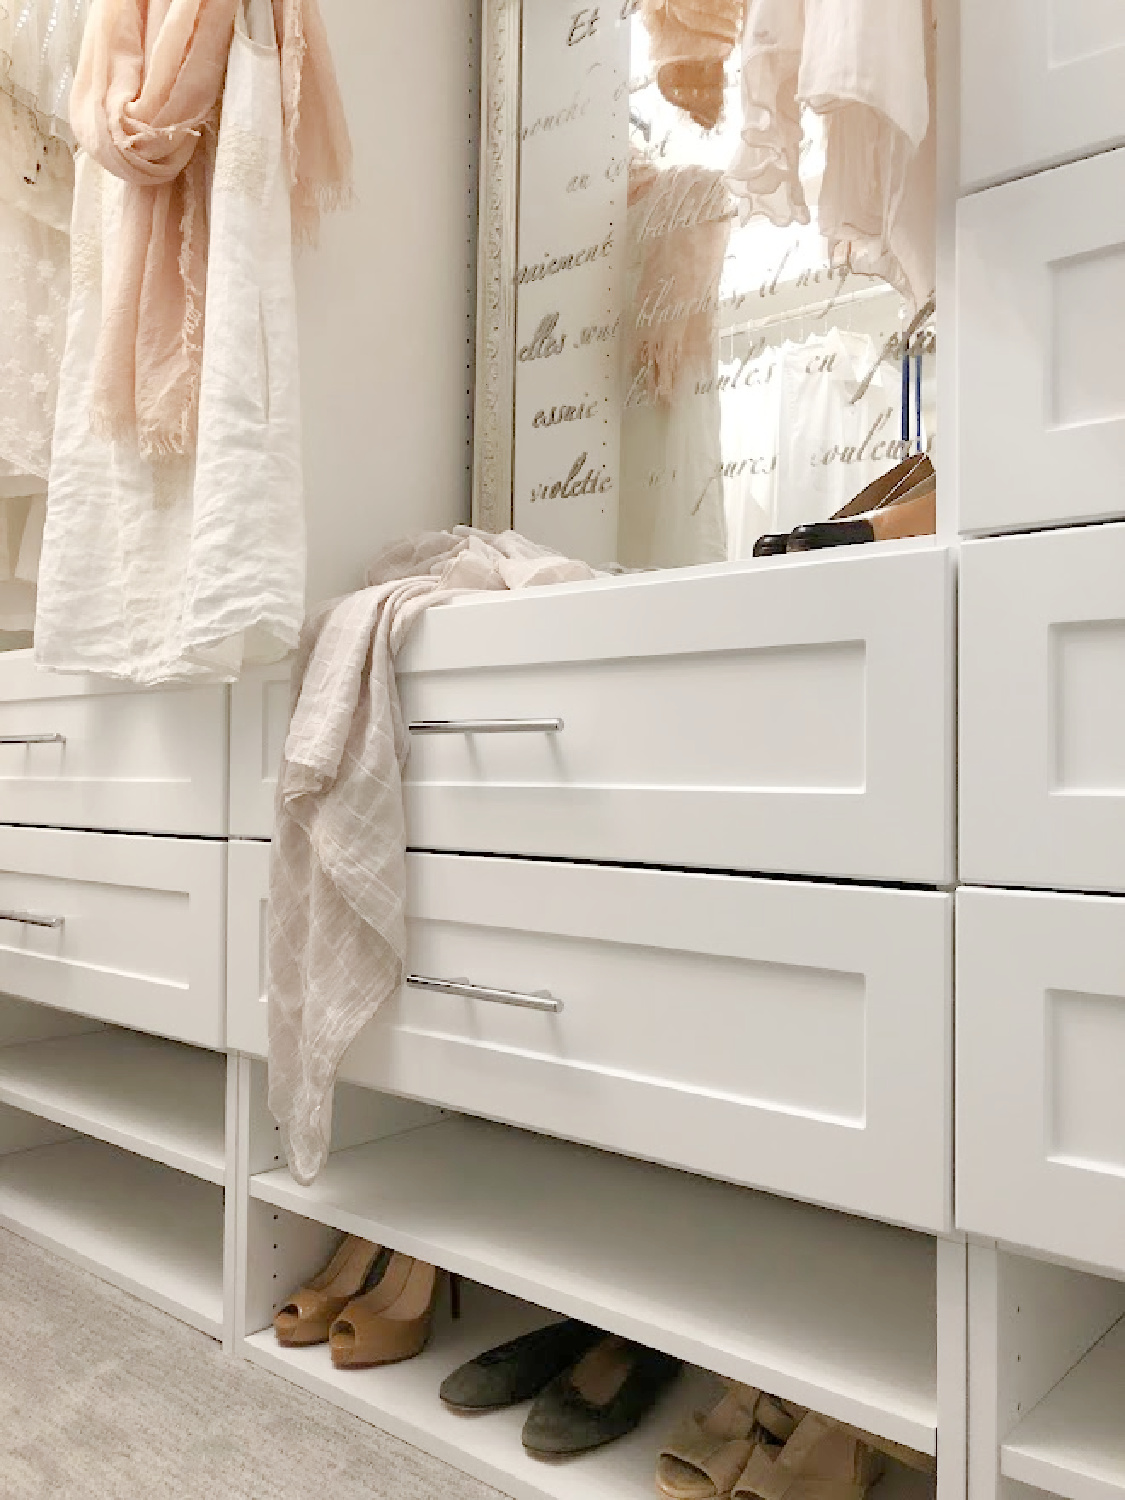 Hello Lovely's DIY custom closet with white Shaker style towers and drawers (Modular Closets). See the before/after photos and find tips for a successful closet upgrade. #diycloset #customclosetideas #closetmakeover #closetmodules #diyclosetmakeover